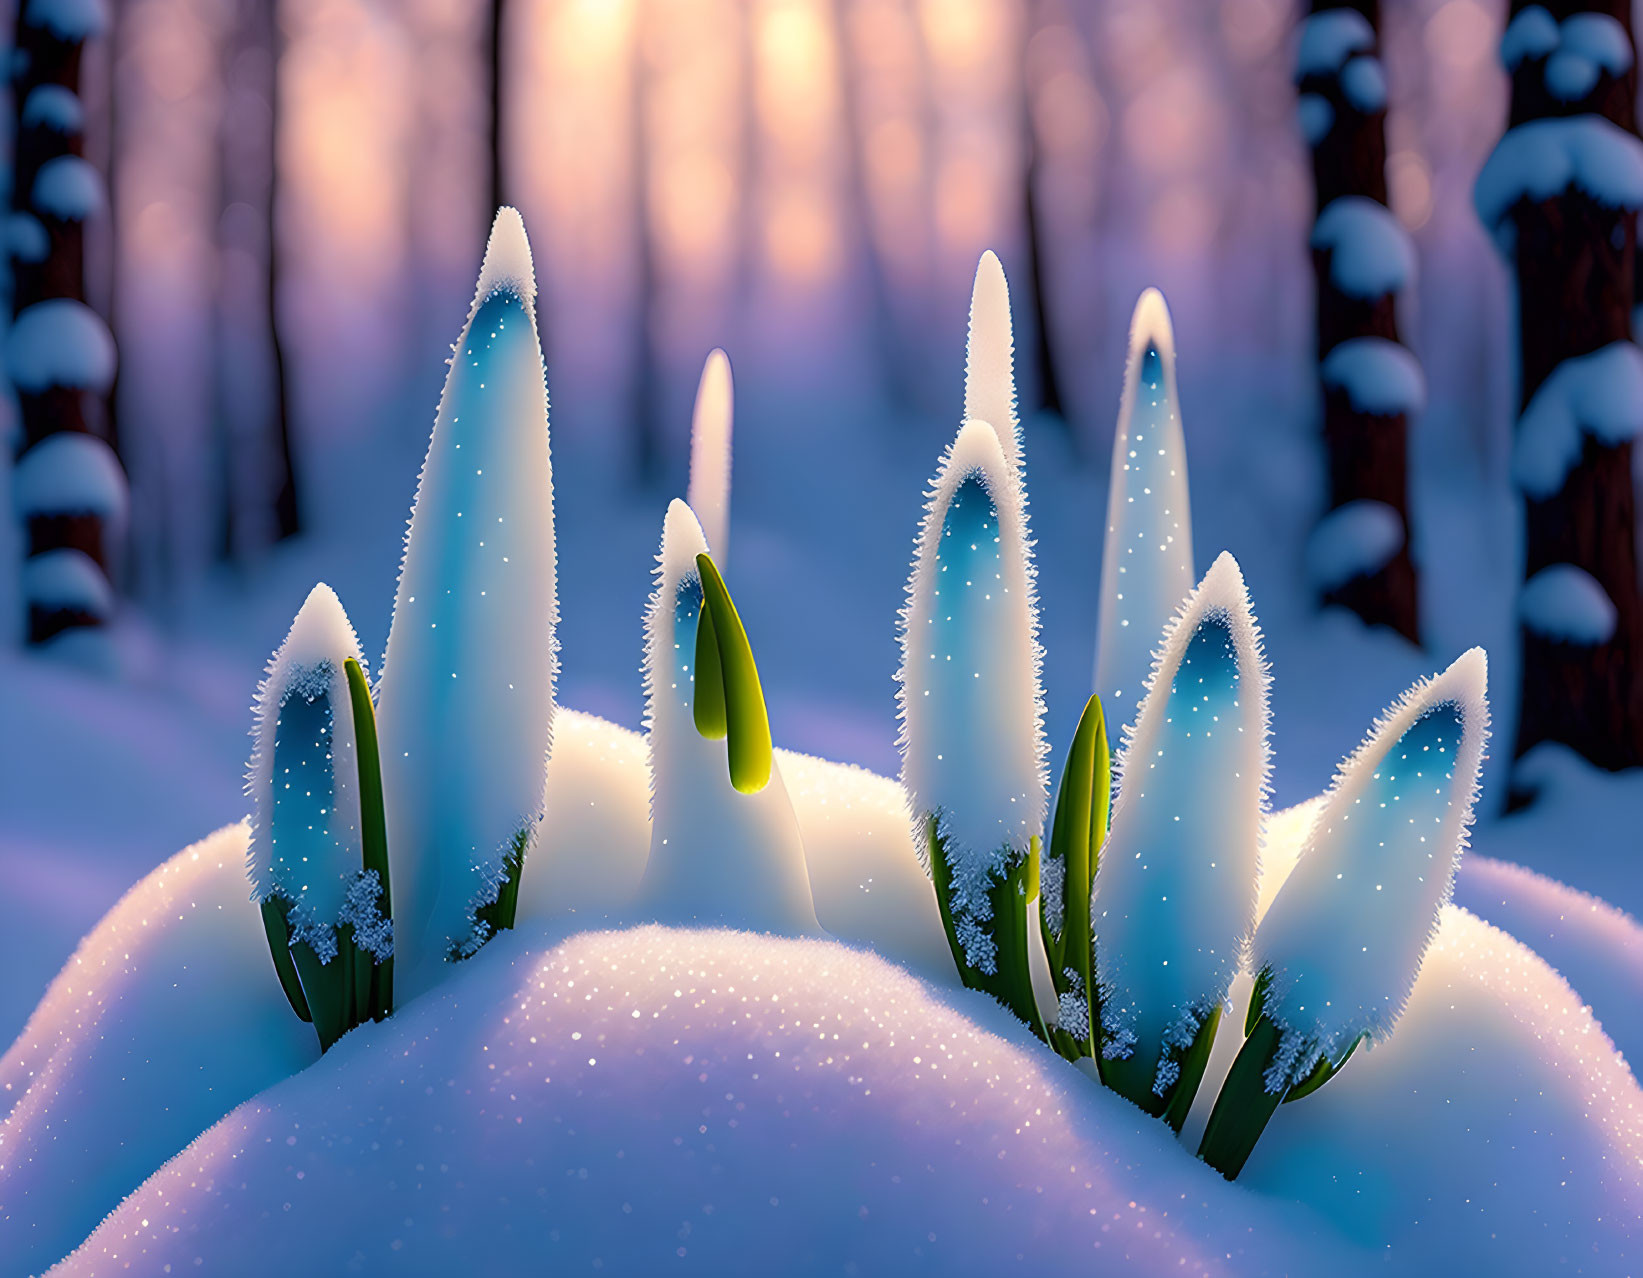 Winter sunrise illuminates snow-covered buds in forest landscape